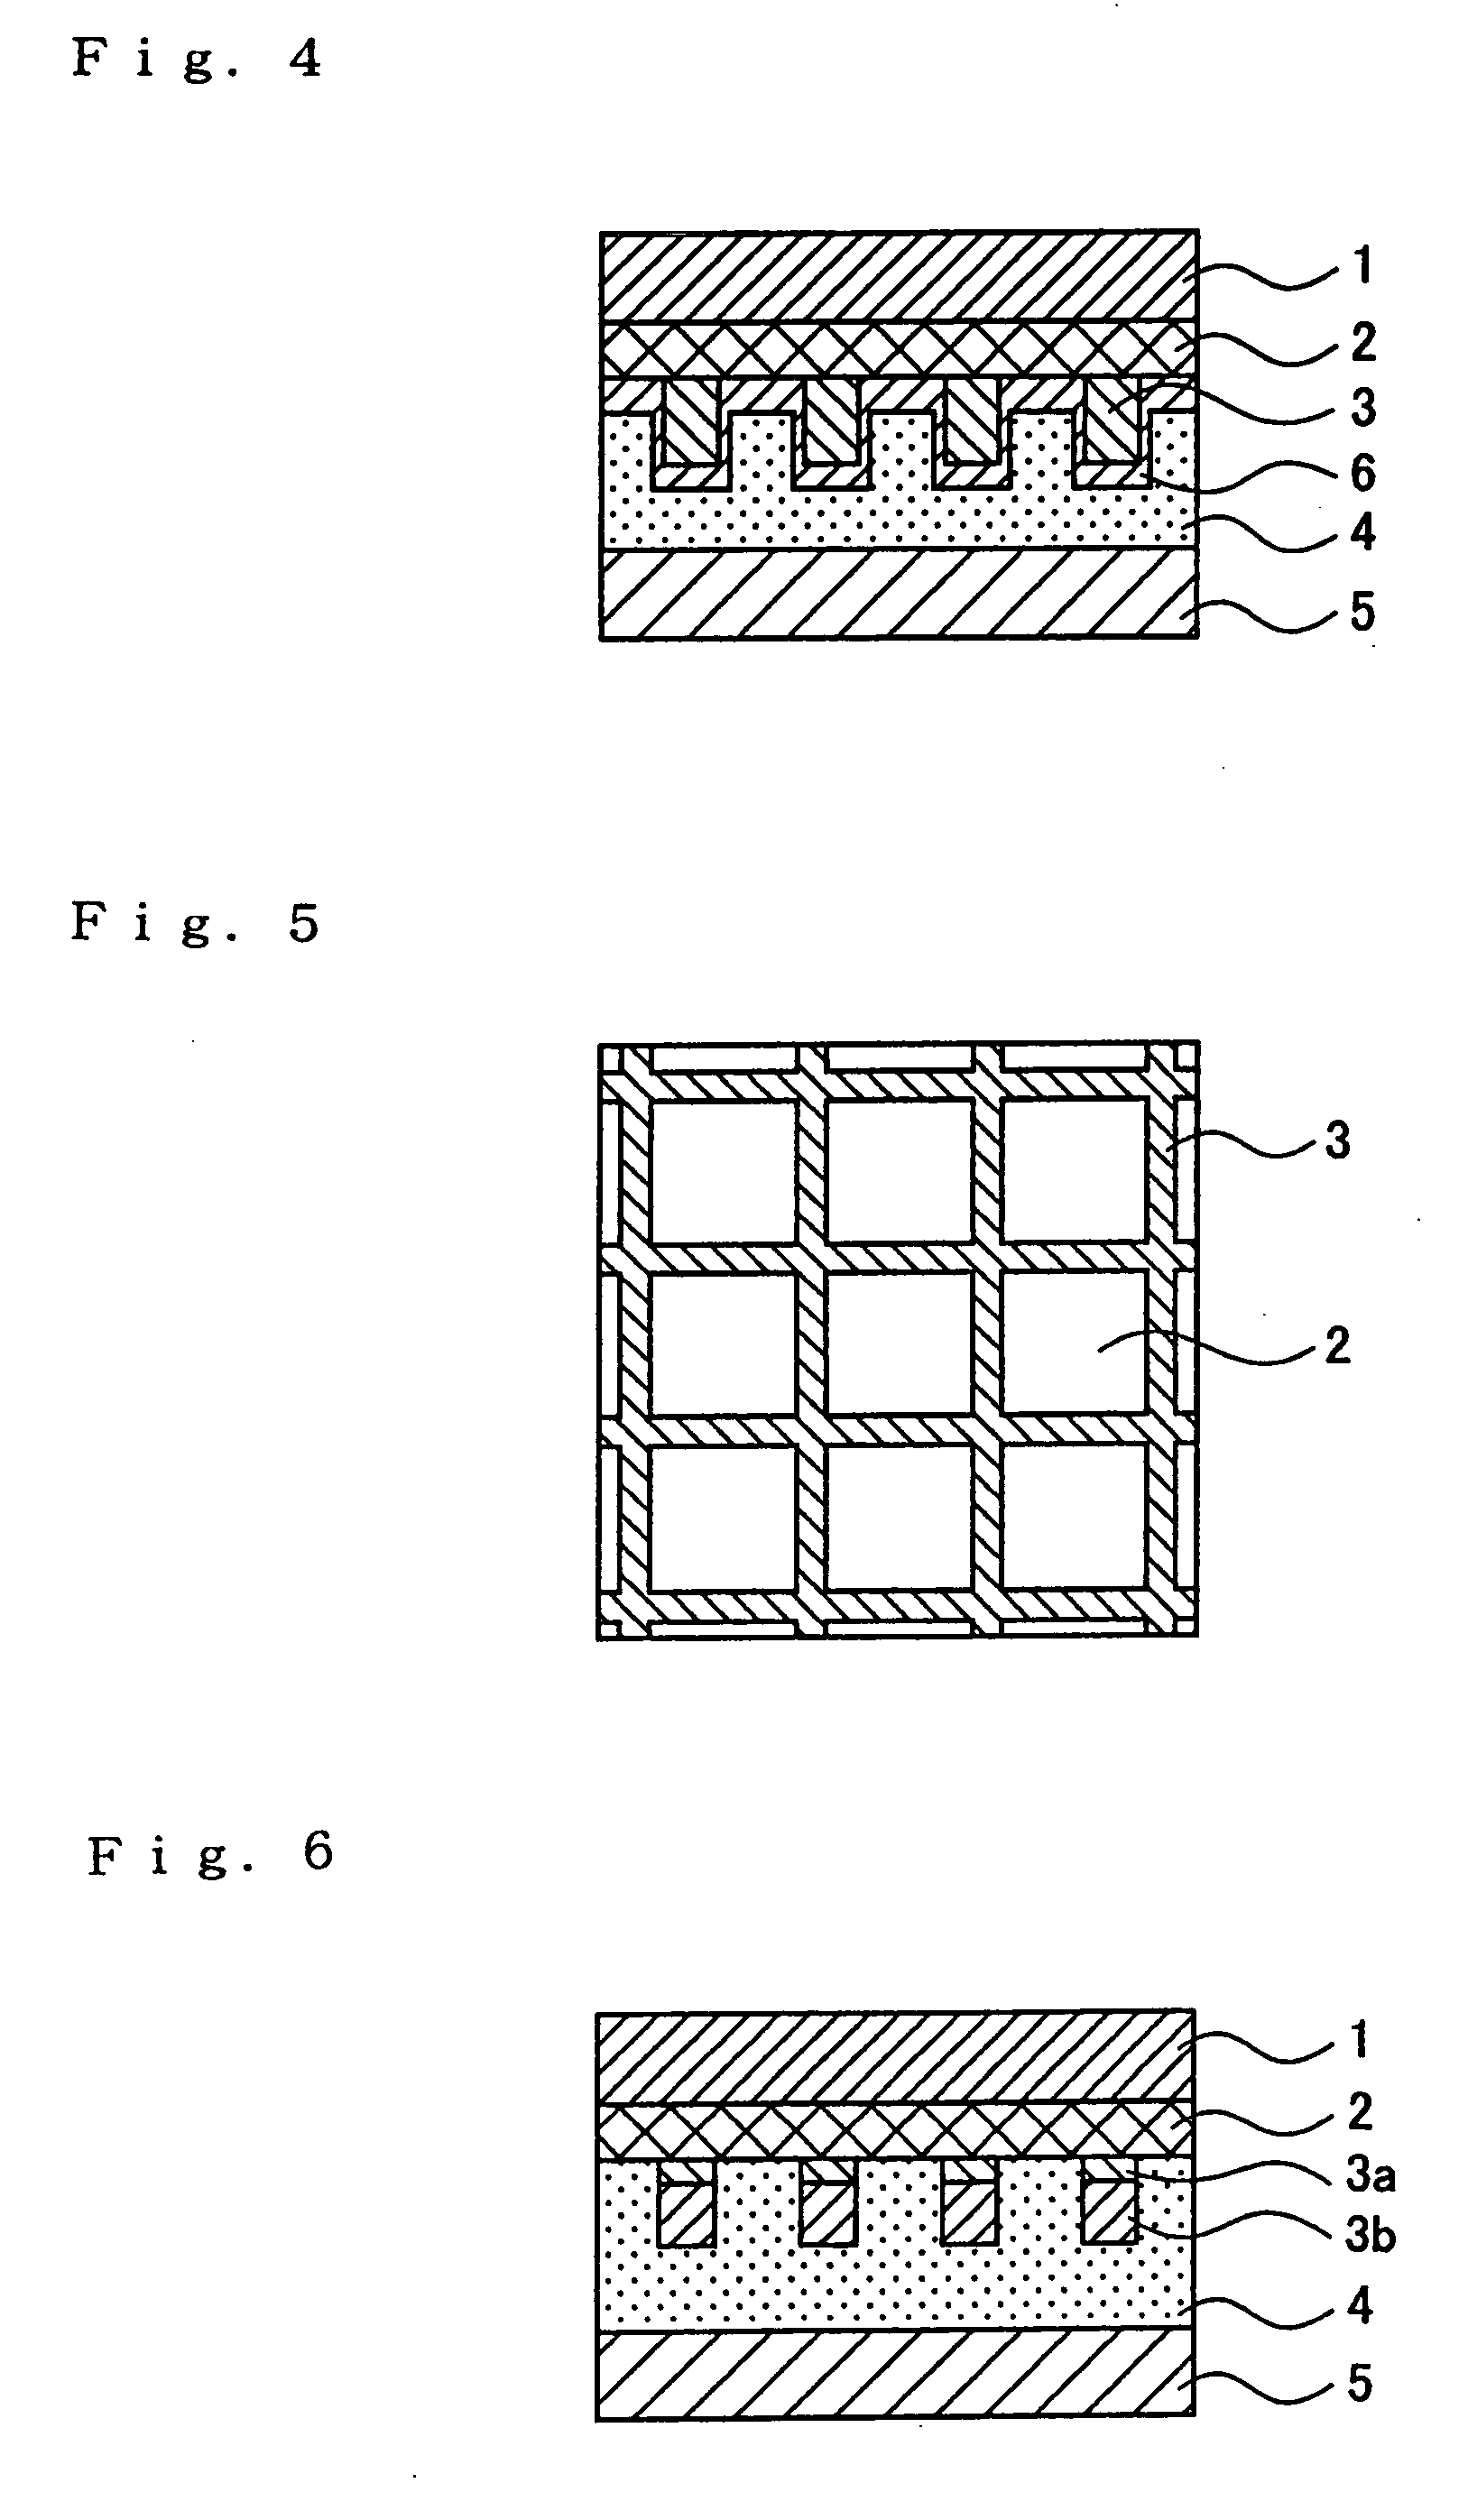 Transparent conductive multi-layer structure, process for its manufacture, and device making use of transparent conductive multi-layer structure